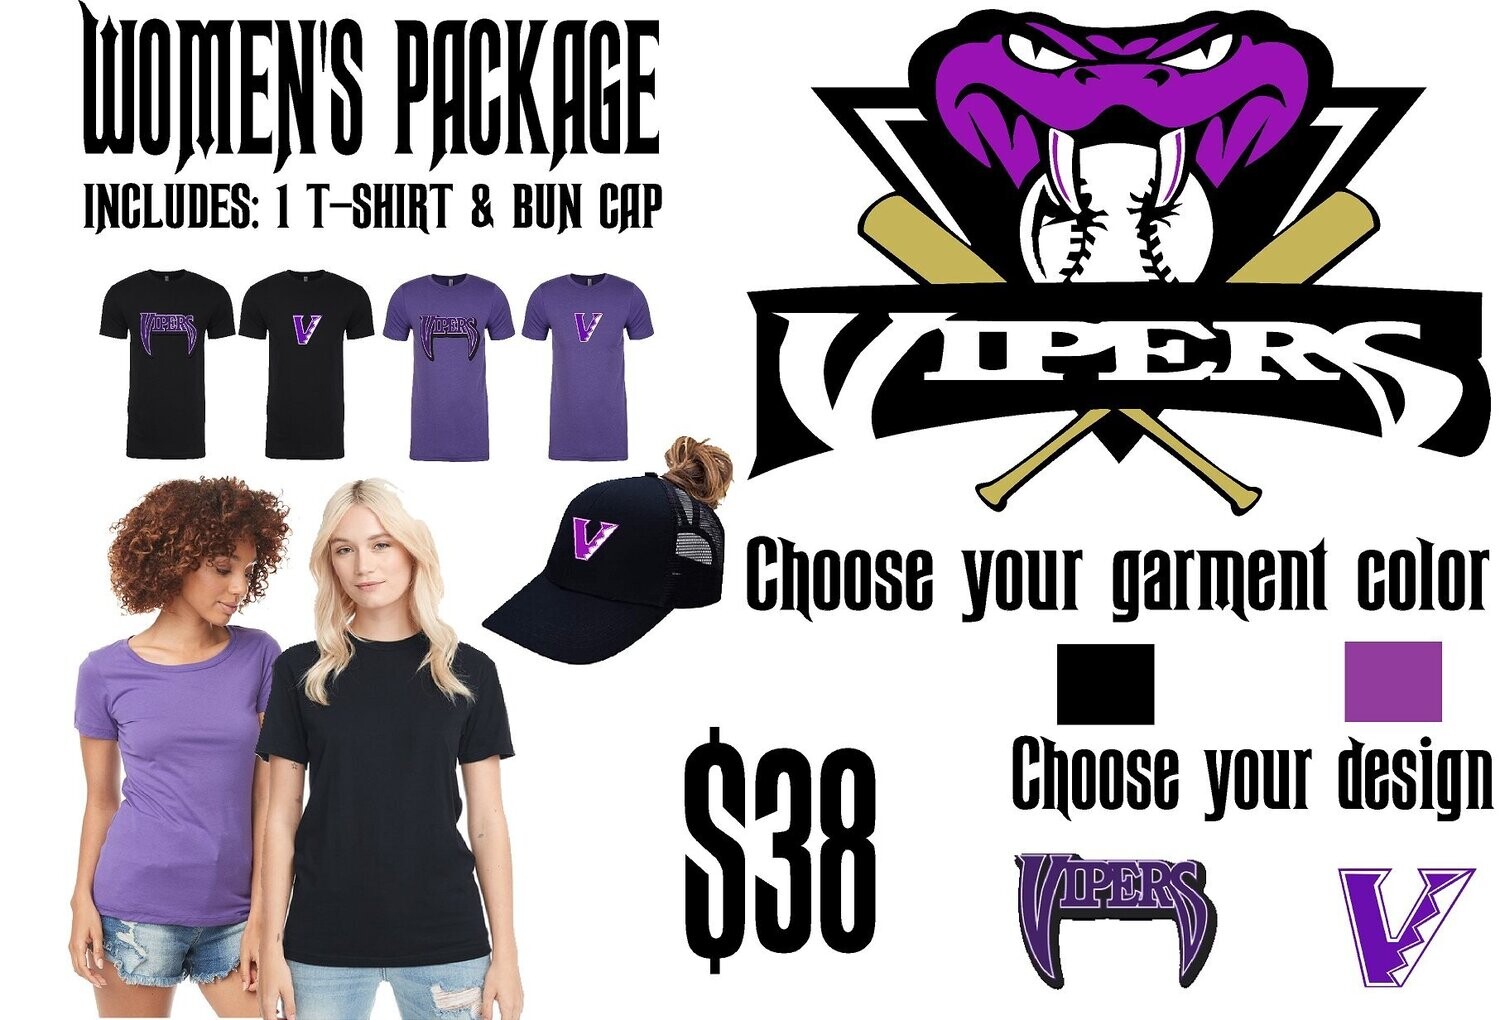 Vipers Women's Package